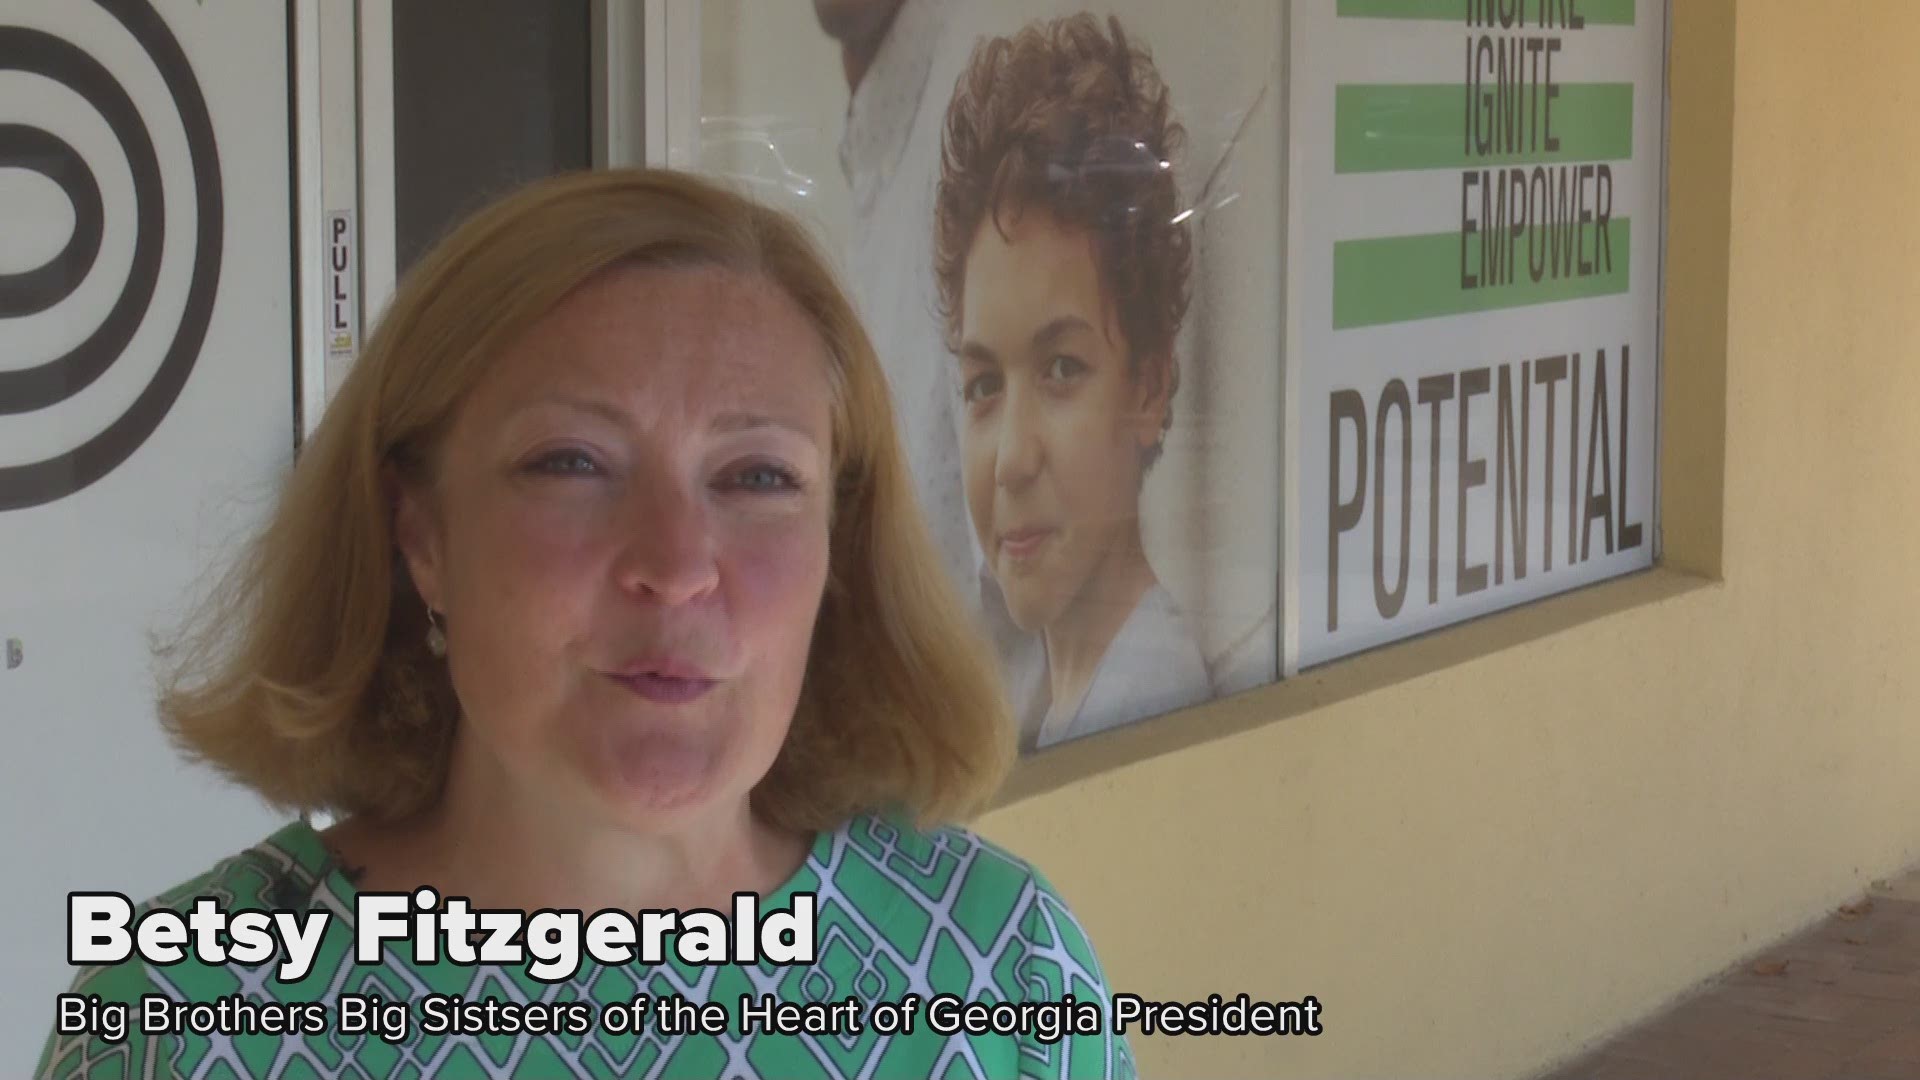 Betsy Fitzgerald with Big Brothers Big Sisters of the Heart of Georgia explains how you can get involved with organization.